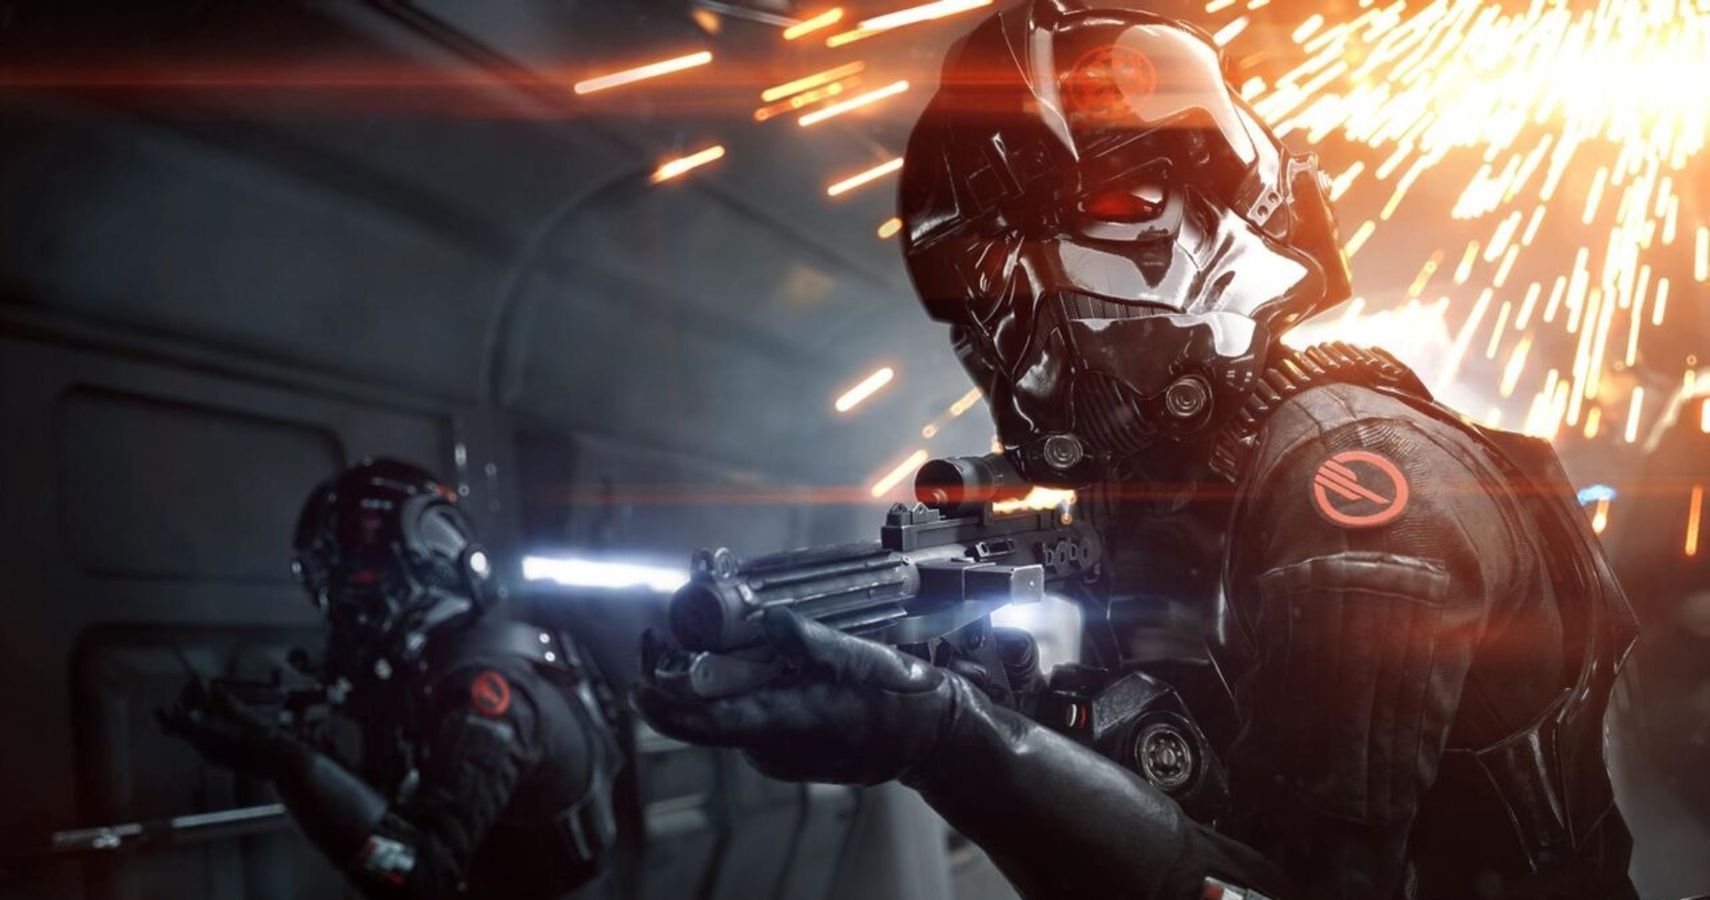 Star Wars Battlefront II is now free on Epic Games Store 